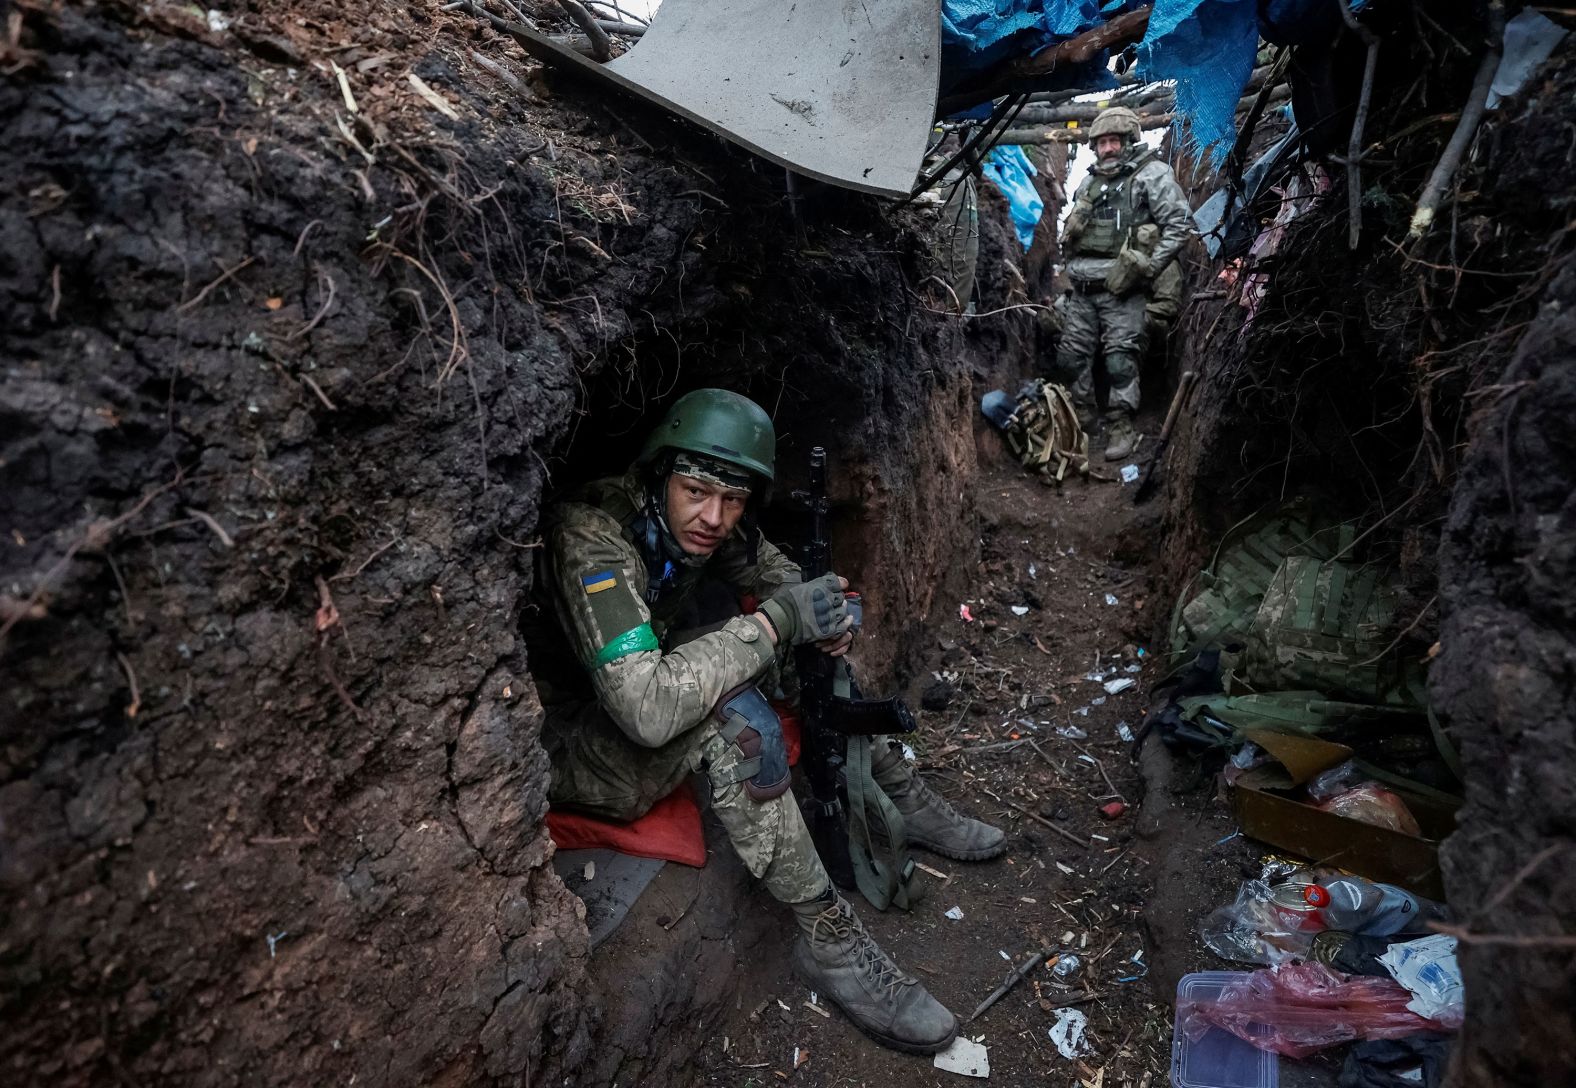 Ukrainian servicemen rest at their positions near the front-line city of Bakhmut on Thursday, May 11. <a href="index.php?page=&url=https%3A%2F%2Fwww.cnn.com%2F2023%2F05%2F11%2Feurope%2Fbakhmut-counterattacks-underway-intl%2Findex.html" target="_blank">Bakhmut is the site of a monthslong assault by Russian forces</a>, including Wagner mercenaries, that has driven thousands from their homes and left the area devastated.